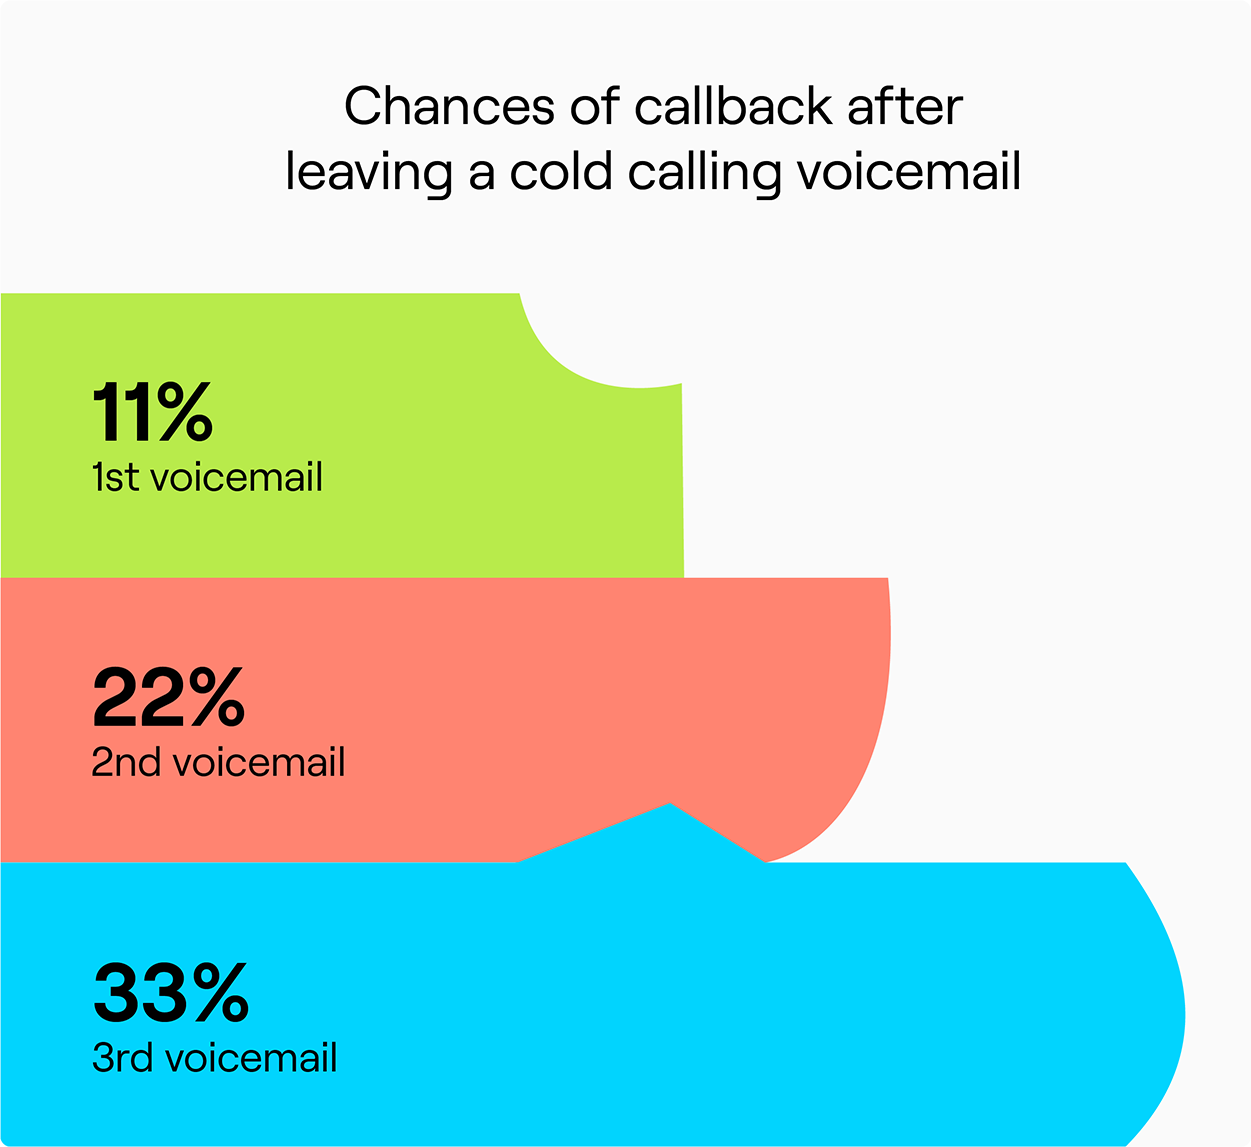 Statistics showcasing the chances of a cold callback after leaving a cold calling voicemail.